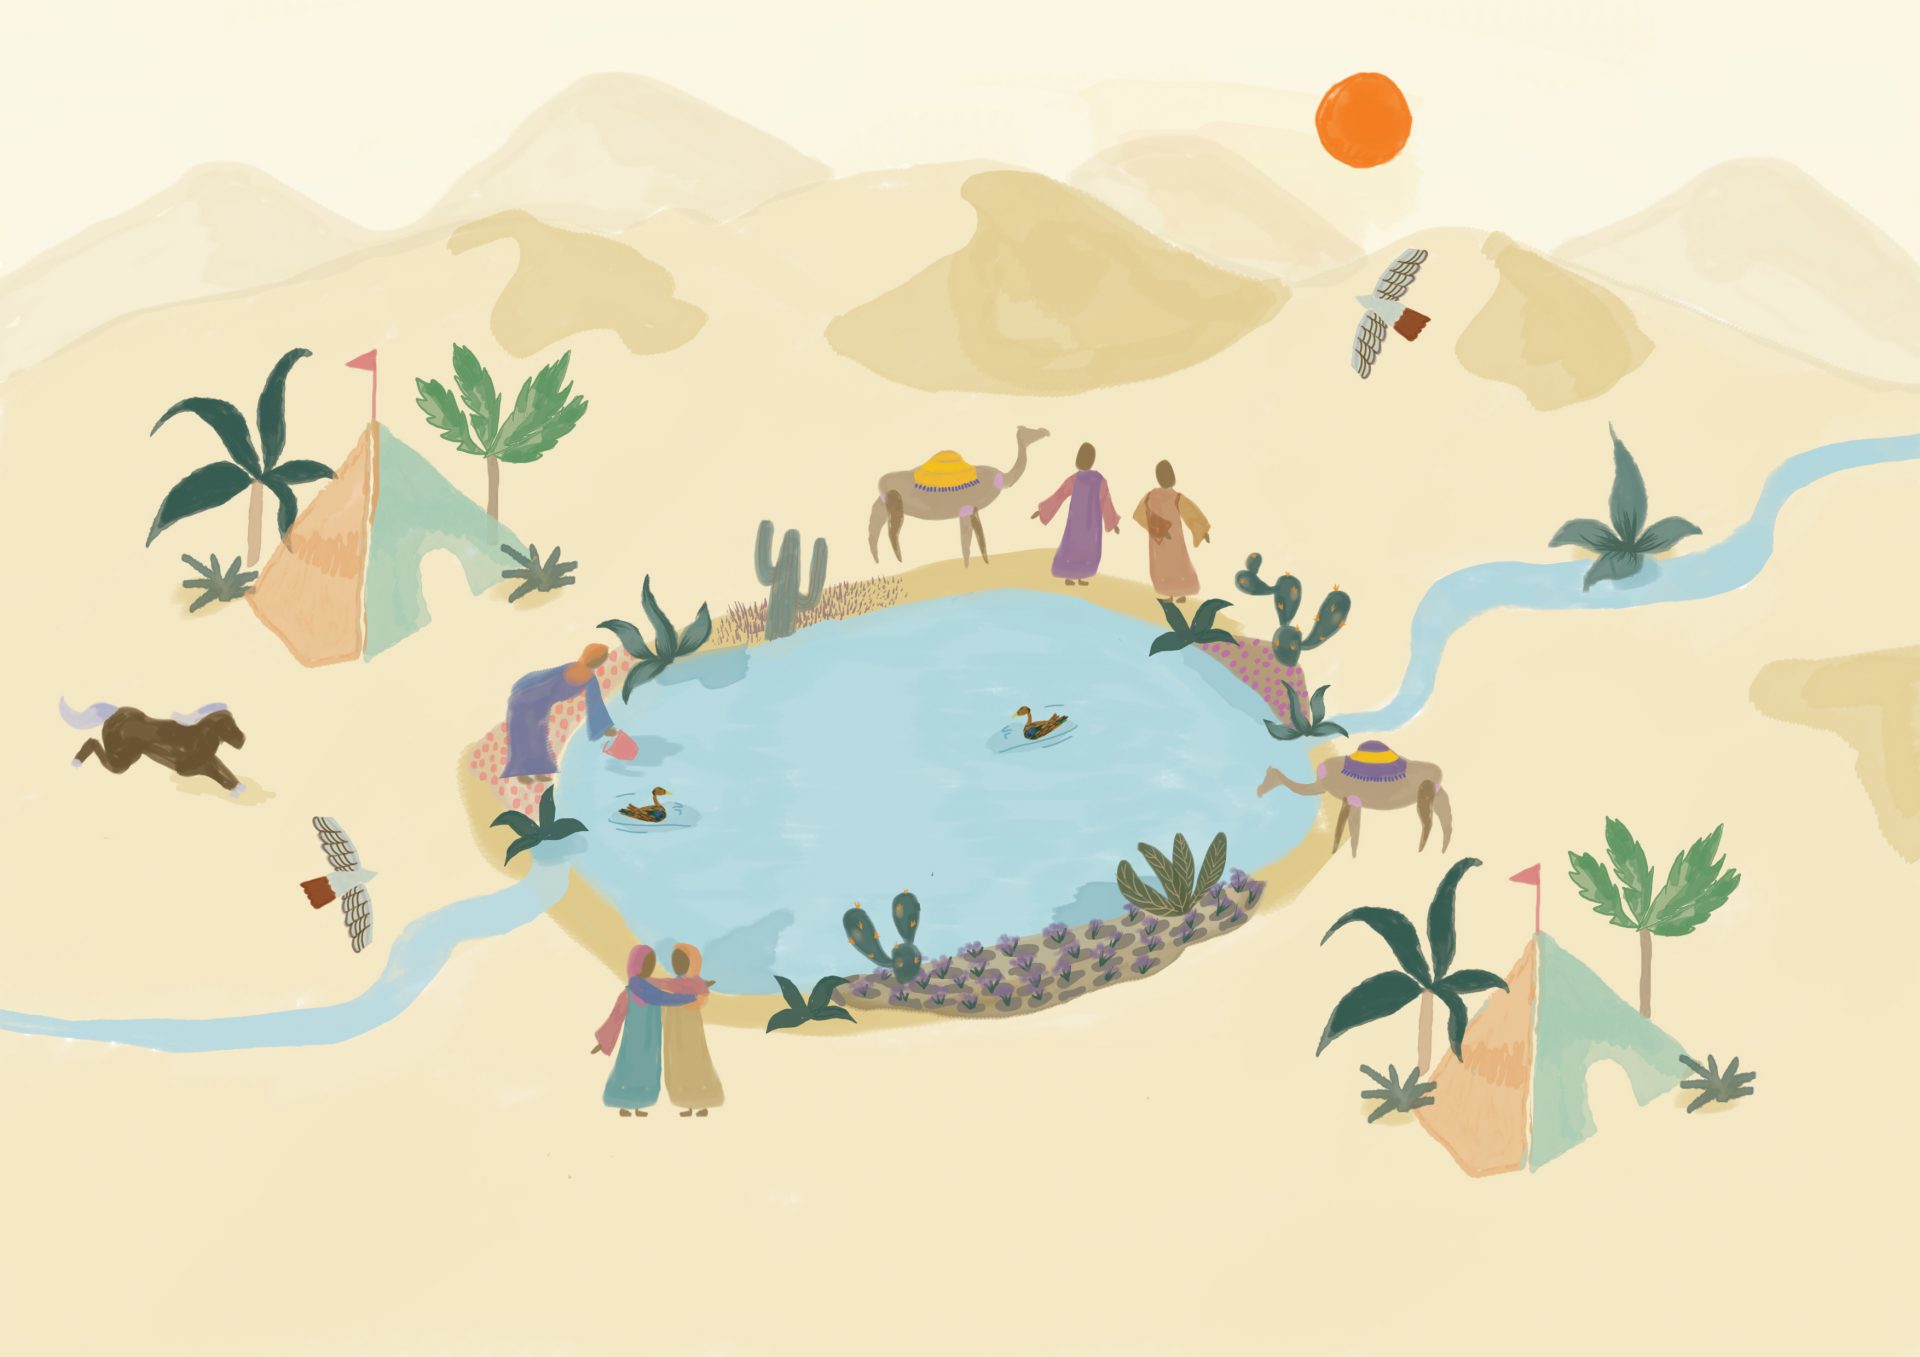 Illustration by Radhika Gupta showing a water harvesting bassin, in the middle of the Jordan desert. Groups of people and animal gathering around